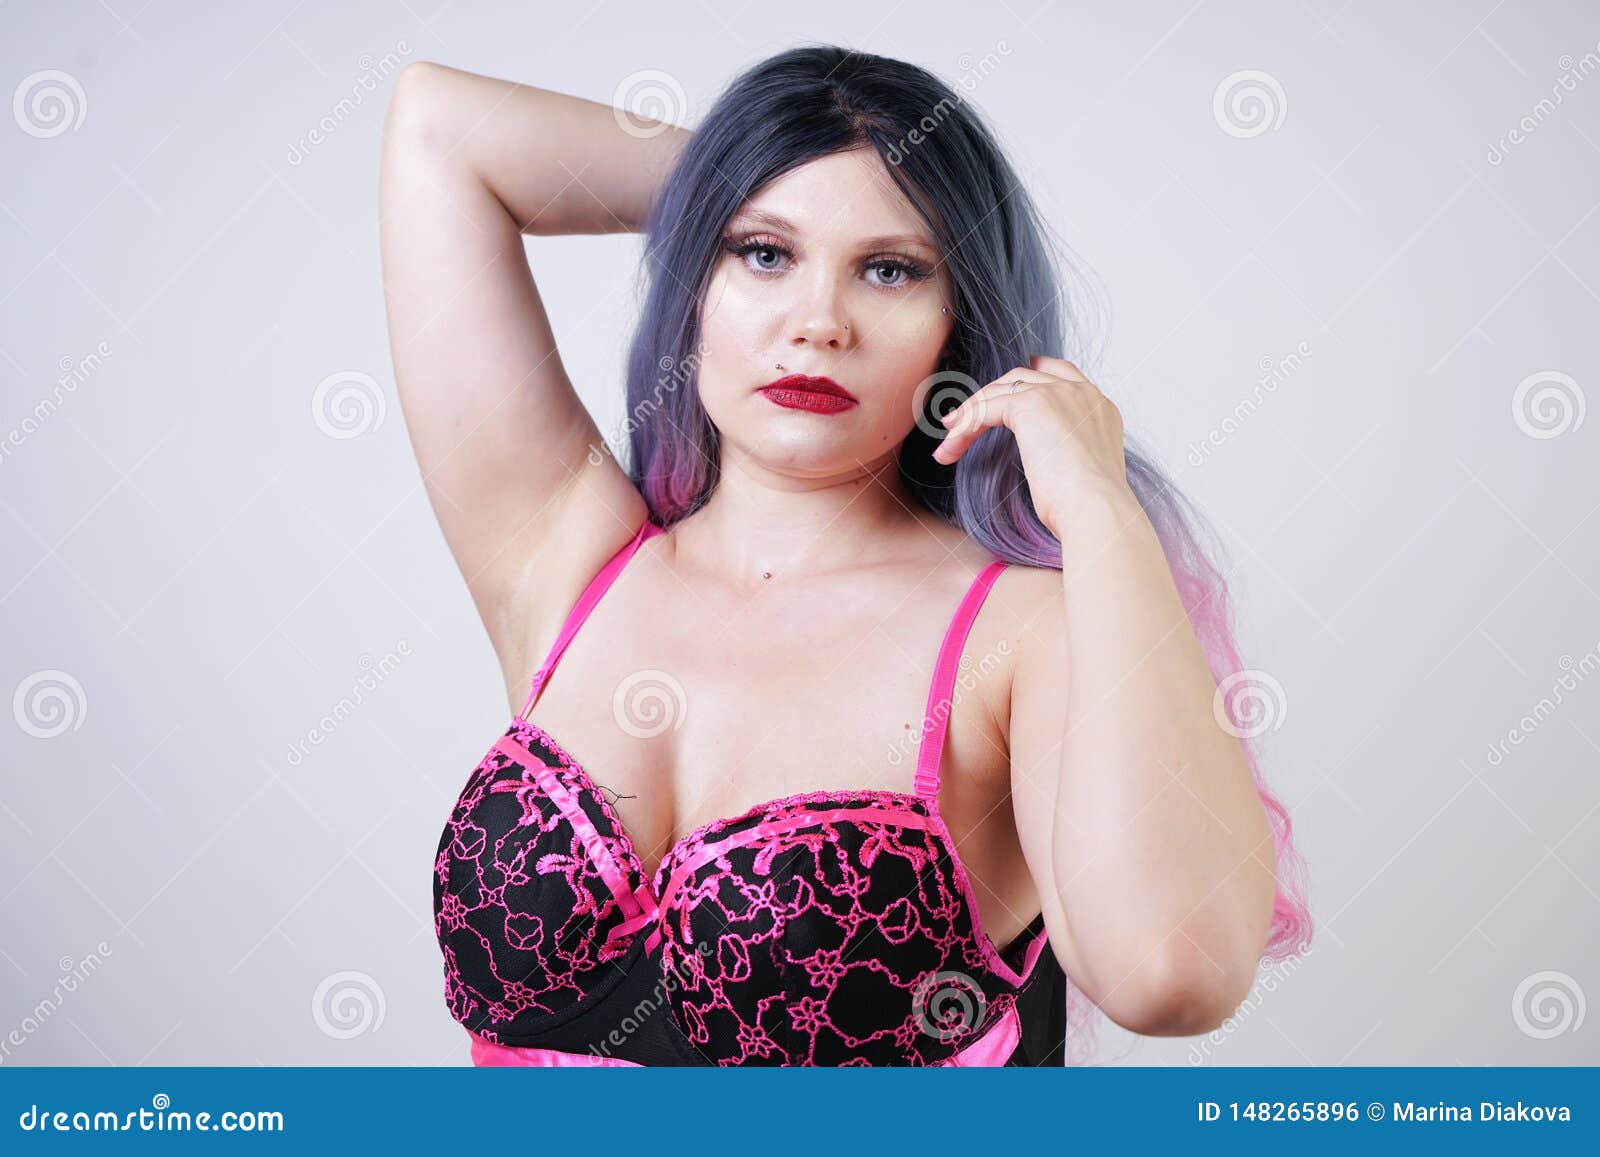 Cute Pretty Chubby Lady Wearing Sexual Babydoll Lingerie Dress on White Studio Background Stock Photo